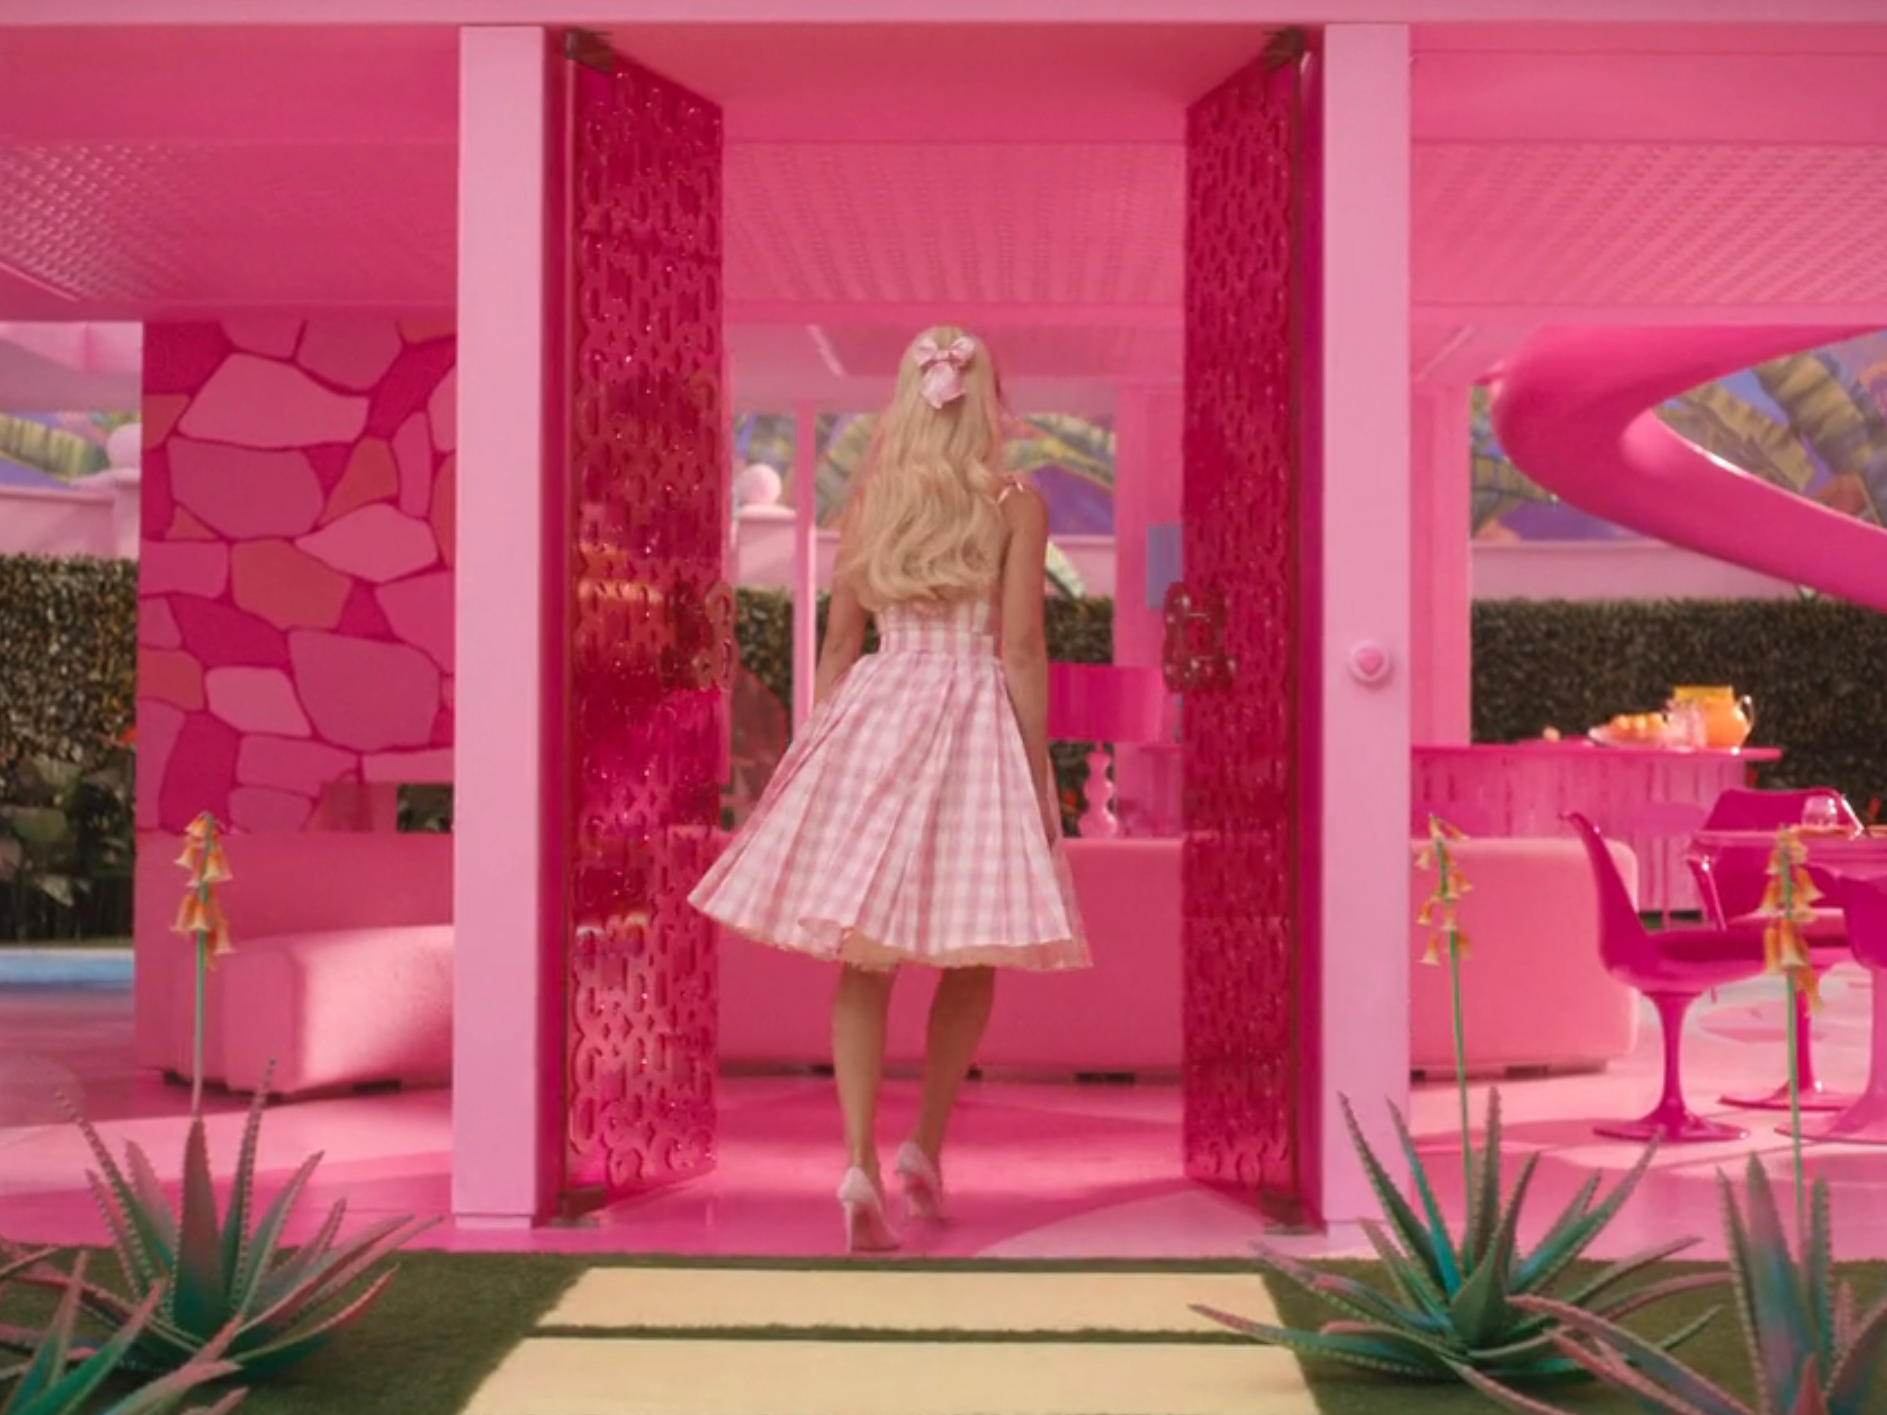 barbie walks into her dreamhouse in the movie. it&#39;s bright pink and has no exterior walls